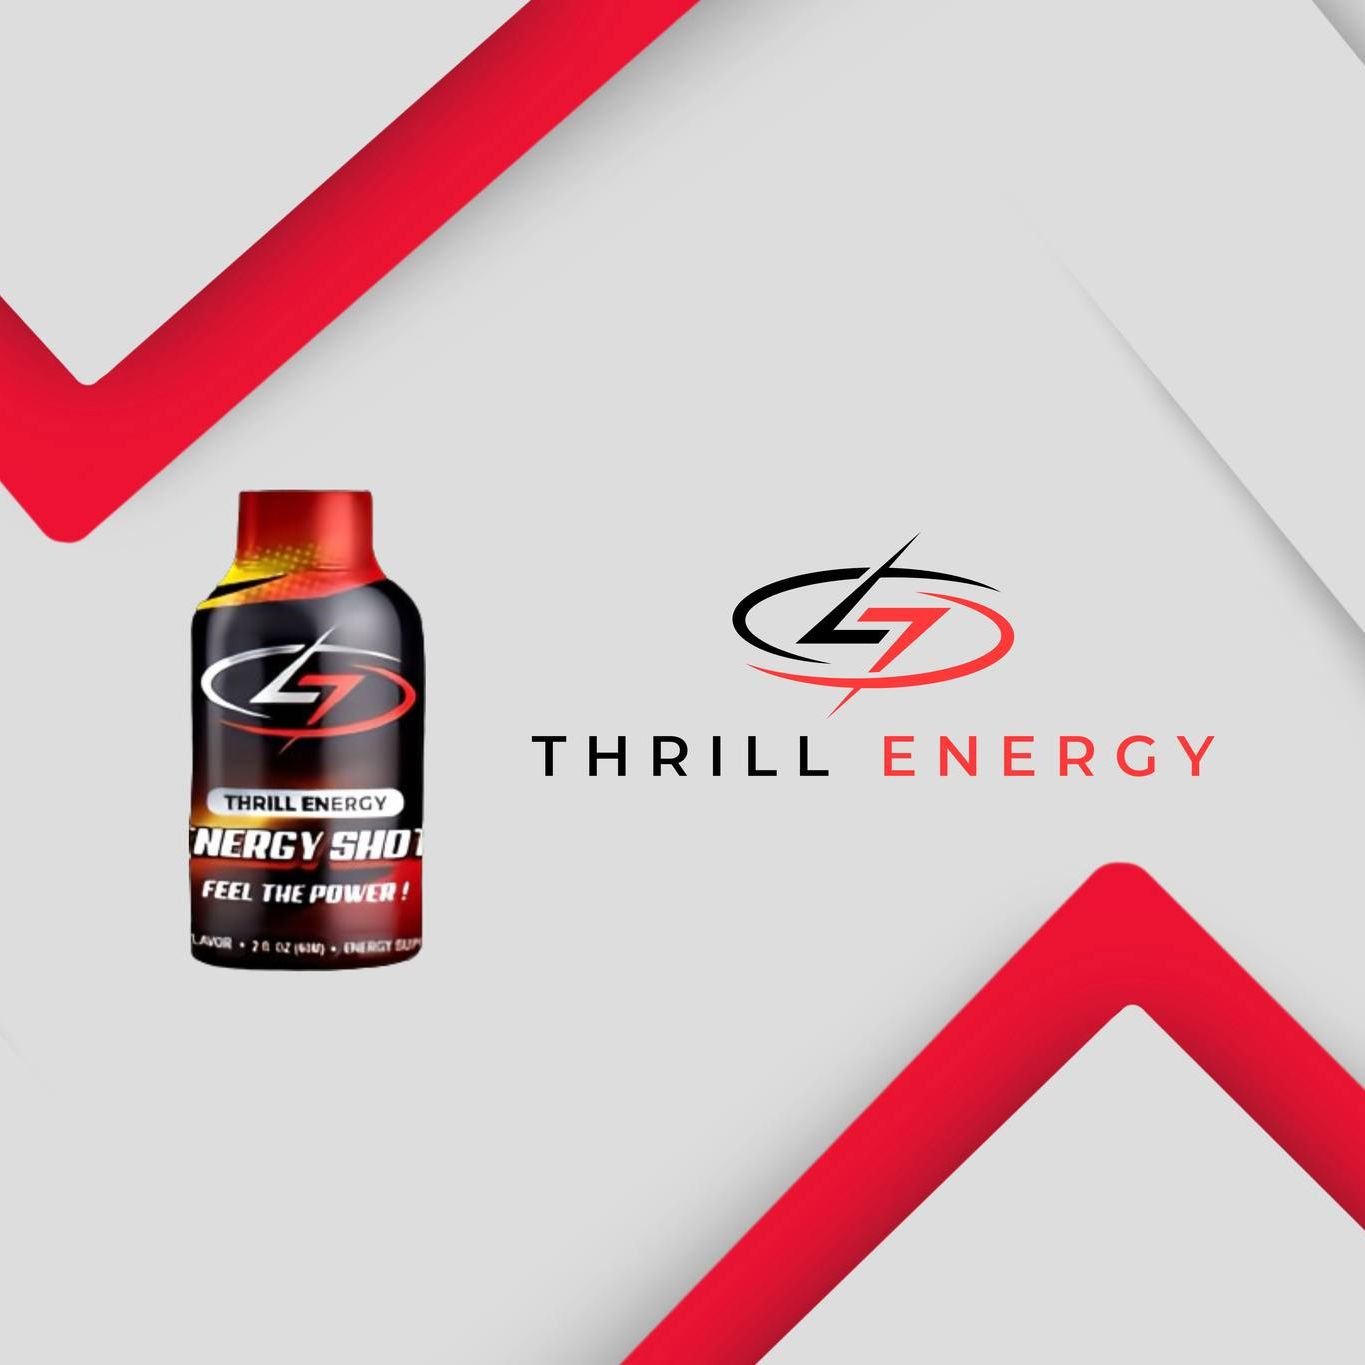 Unleash the power within with Thrill Energy! 💥 Our energy shots are here to fuel your drive and ambition, helping you conquer your goals with unstoppable energy. Get ready to ignite your passion and unleash your potential! Coming May 1st, 2024! #Thr